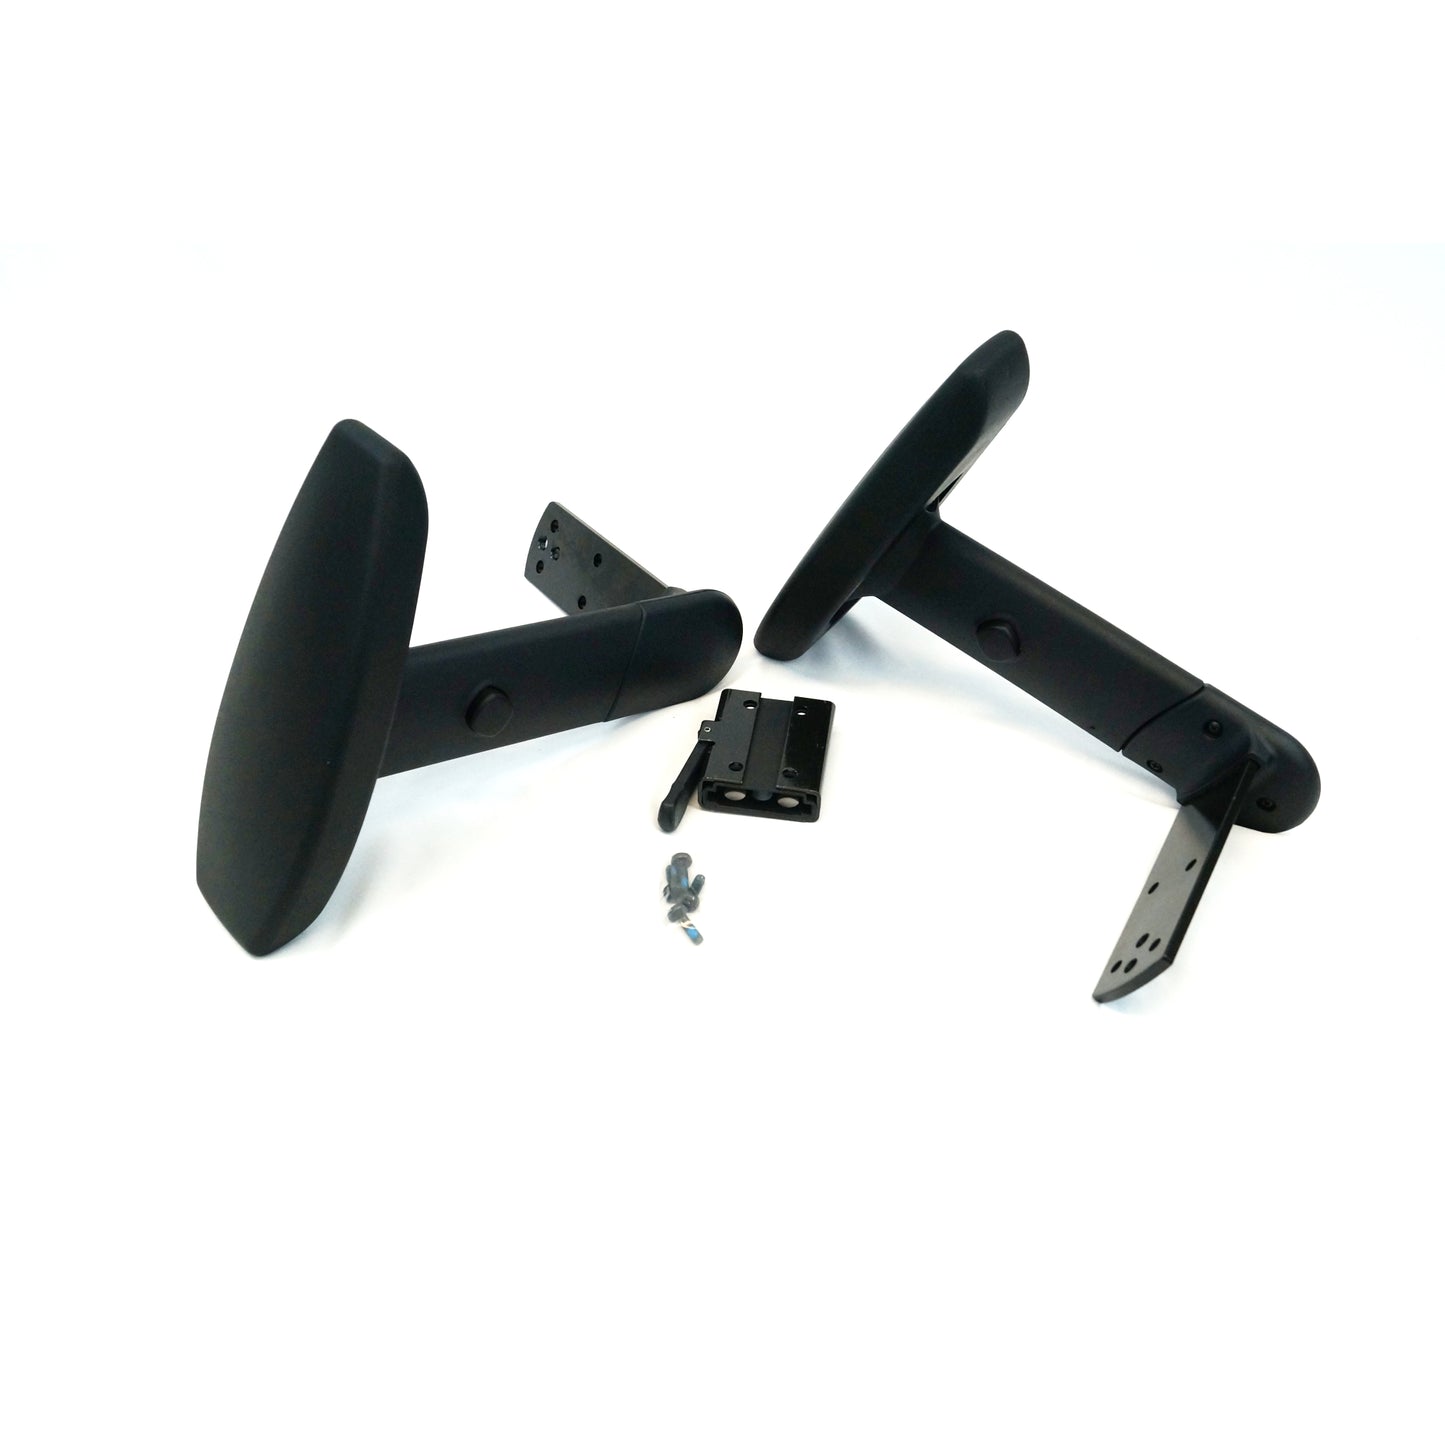 3" Height Adjustable T-Arms for VanGo Mobile Office Chair - Black